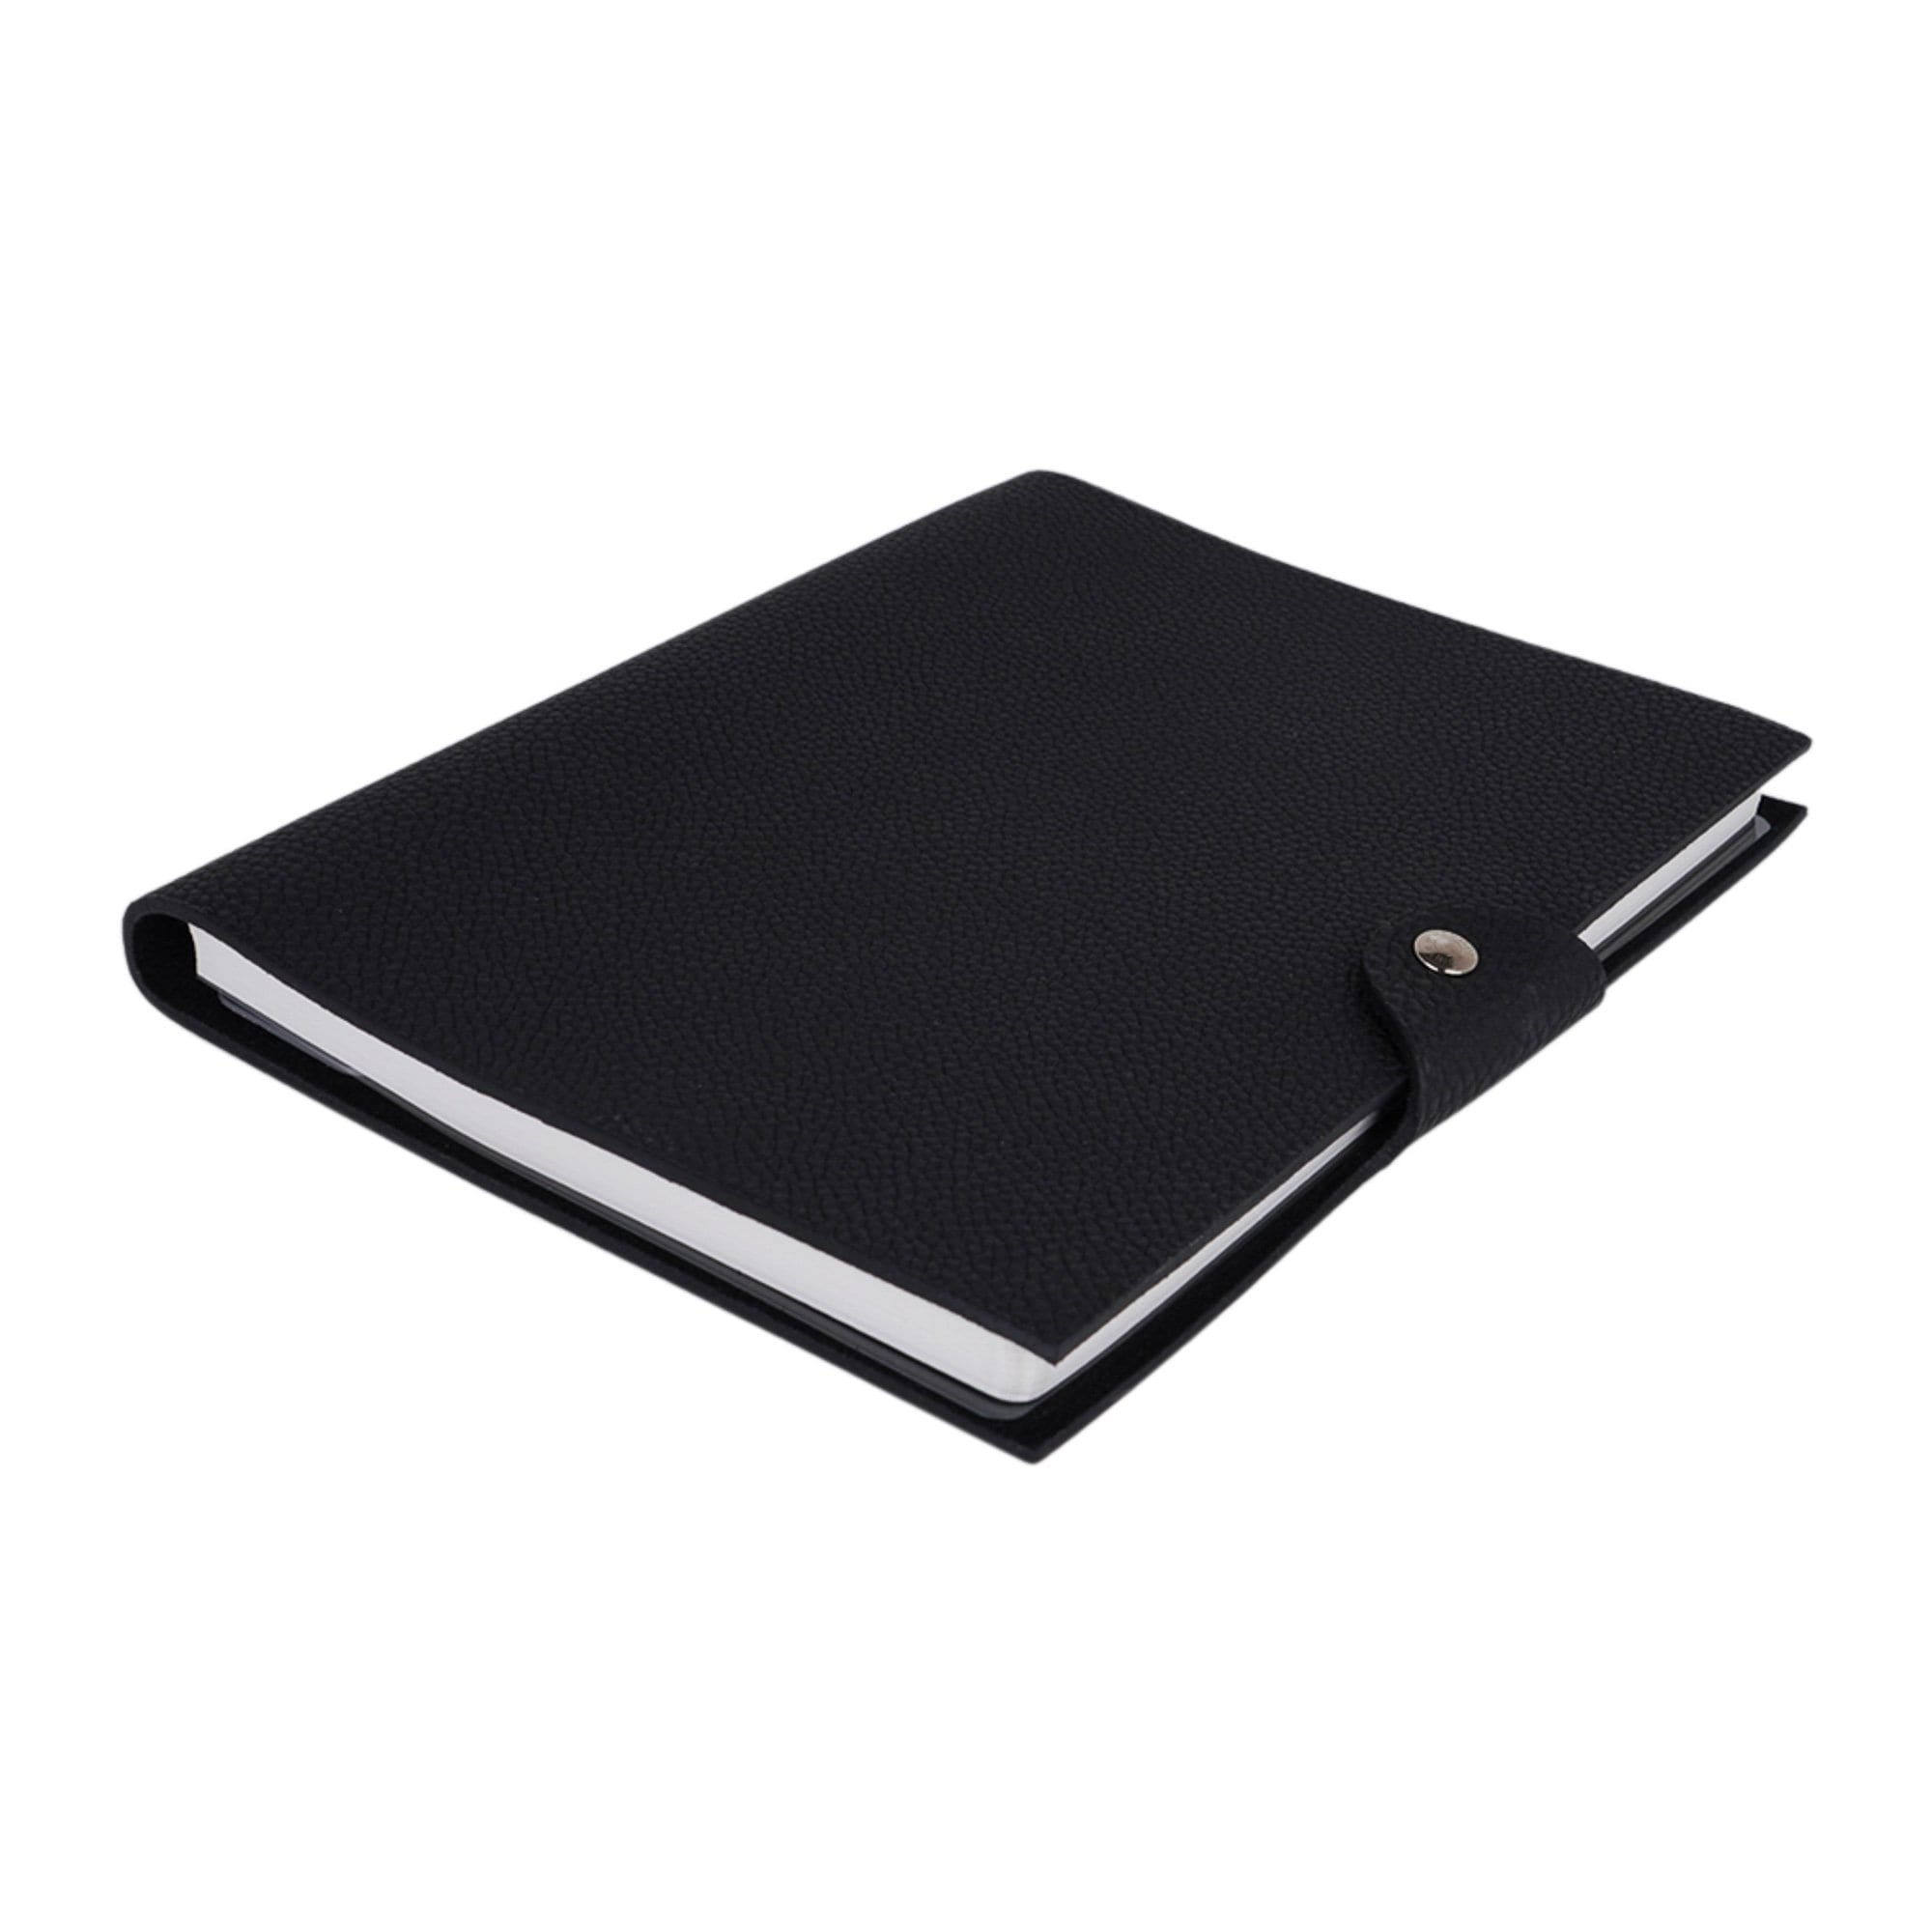 Hermes Ulysse Notebook Cover Black MM Model with Refill New – Mightychic